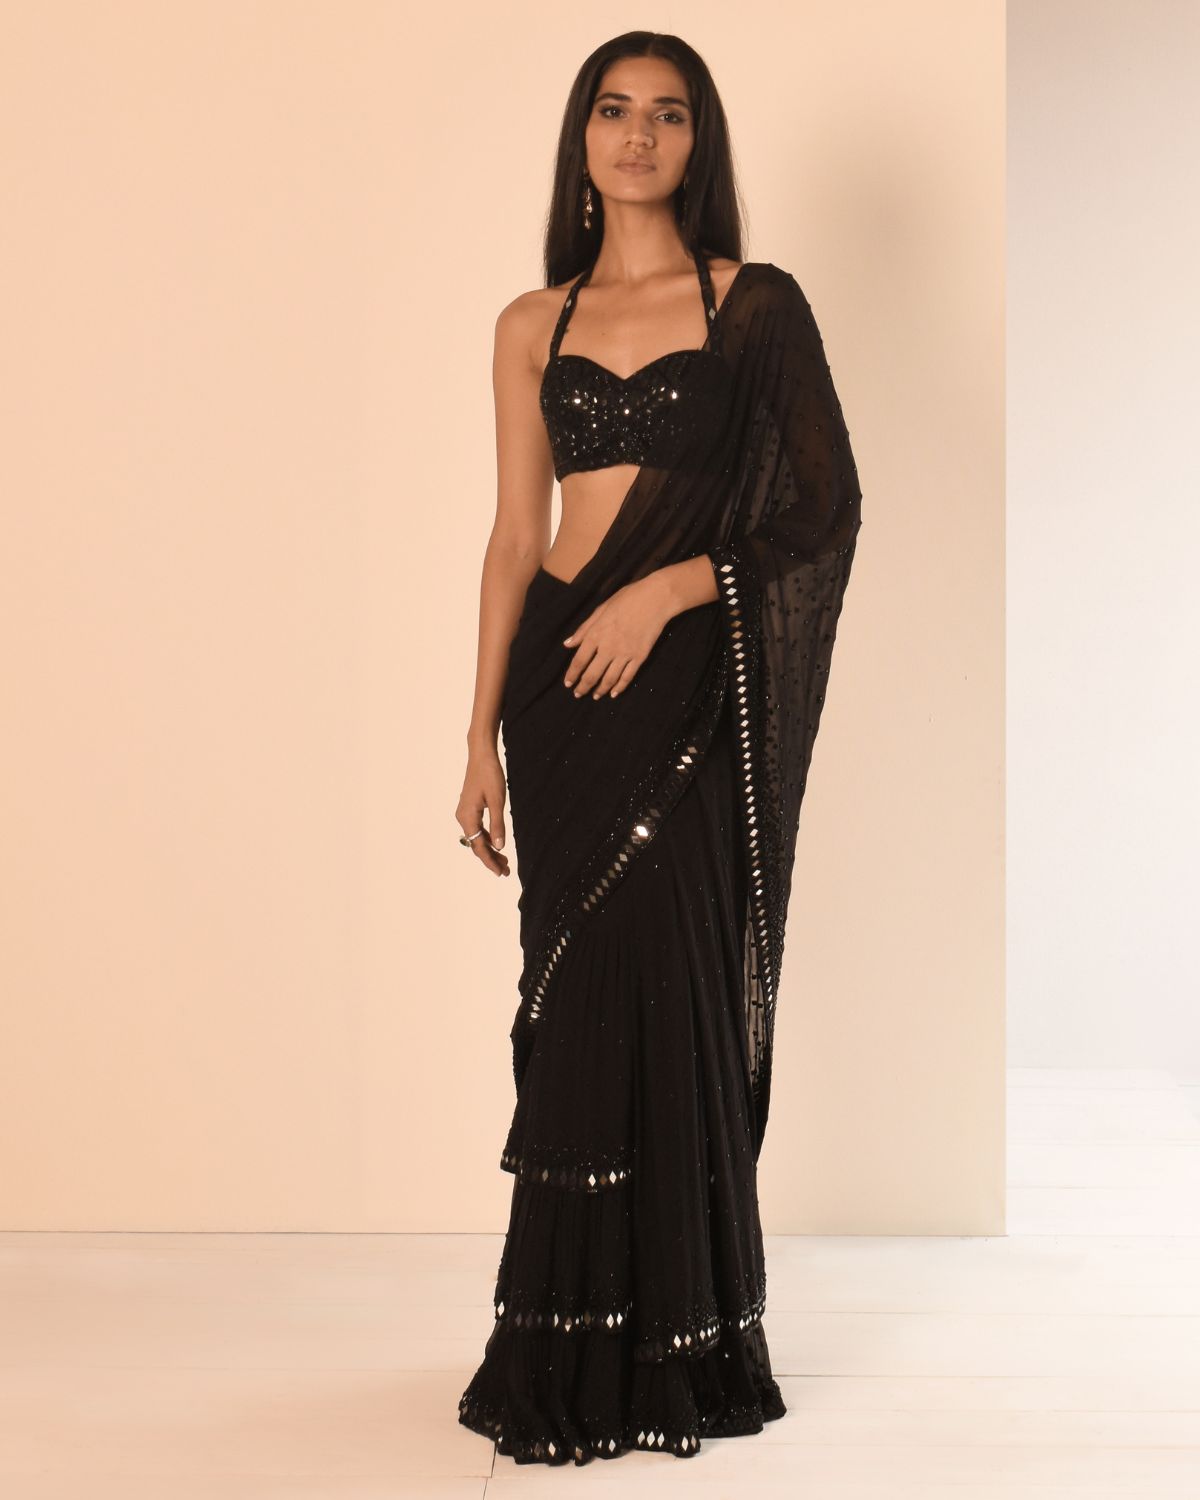 Shop Raina Georgette Pre draped Saree for Women Online in India at Aachho